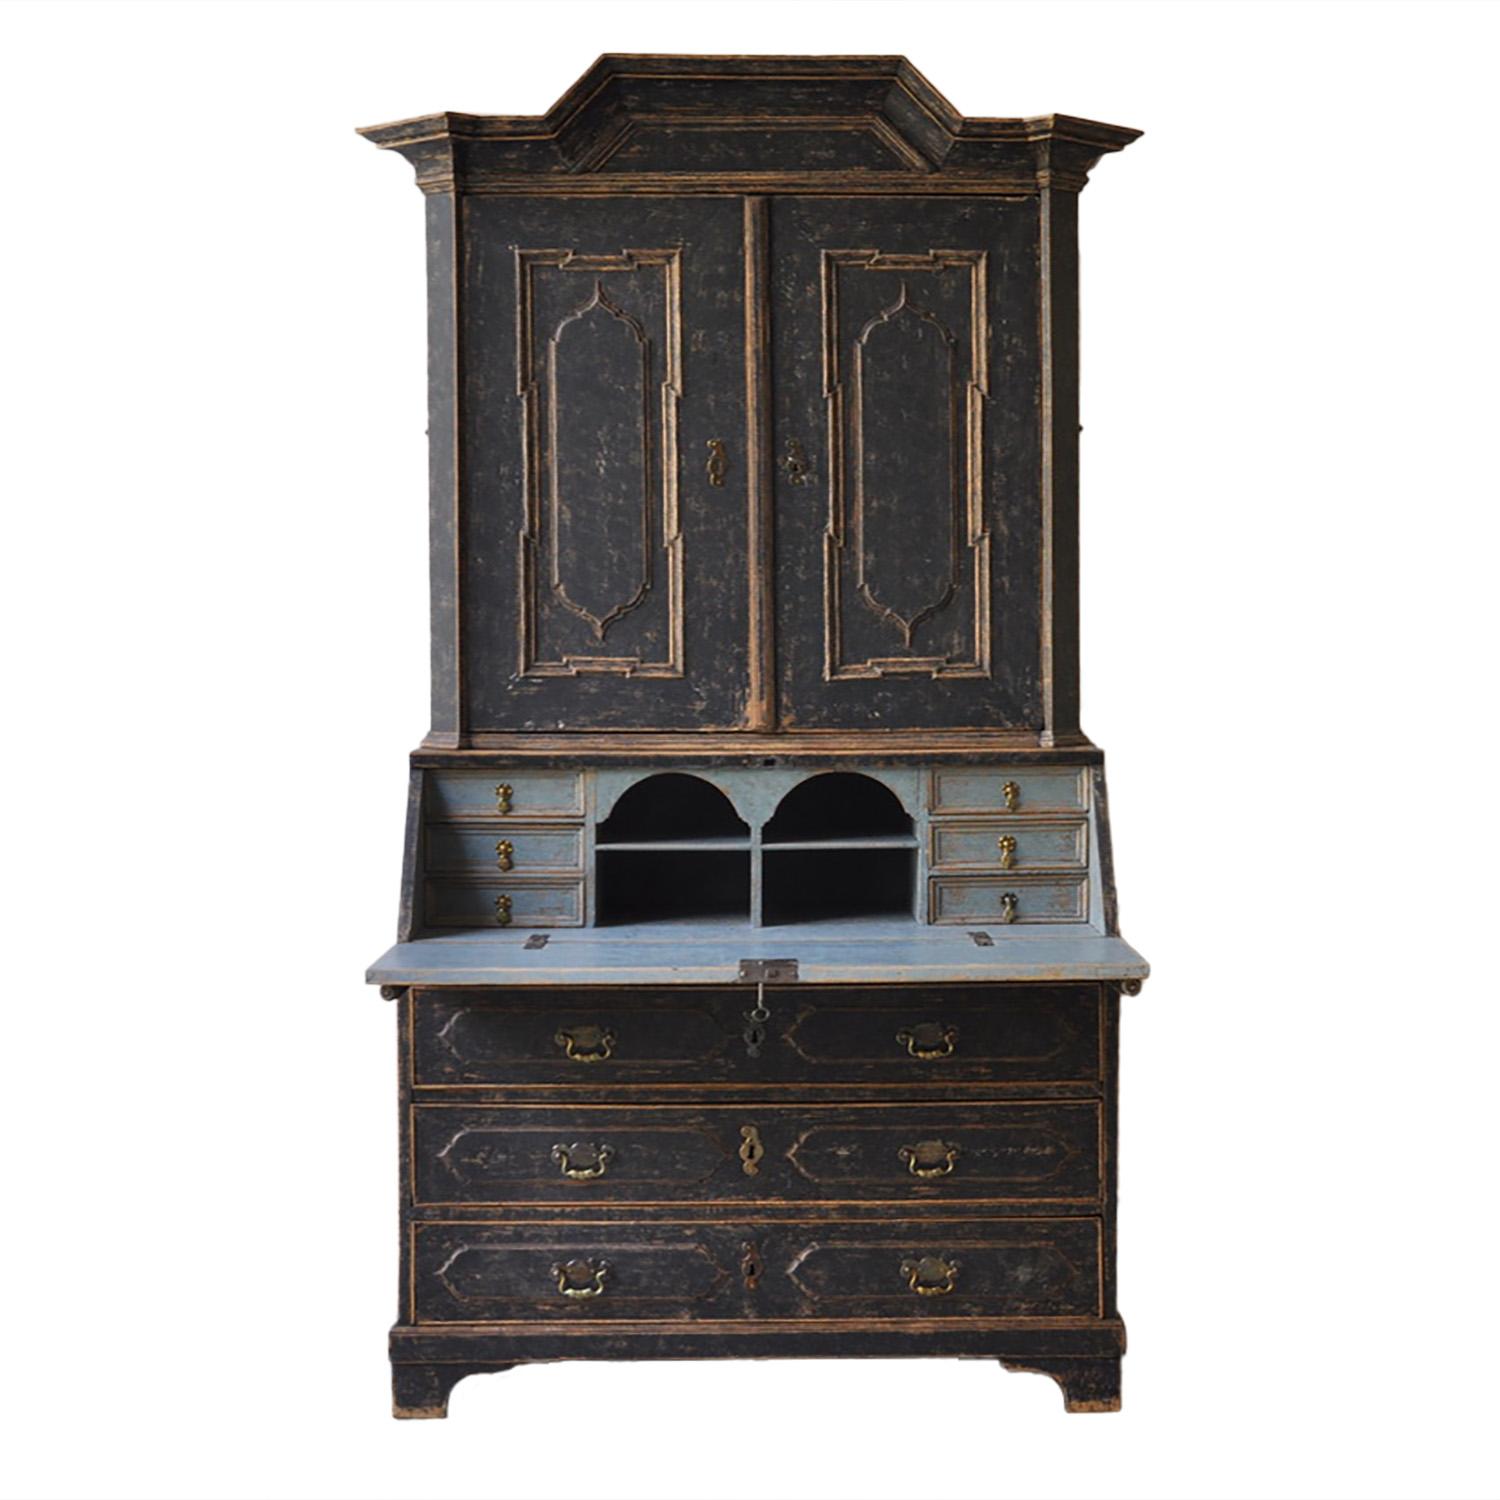 18th Century secretary with a decorative carved pediment. Two doors open to six drawers, and another small door opens to further drawers. A fall front desk with six further drawers and two pigeon holes, and below, three long drawers. Later hardware,